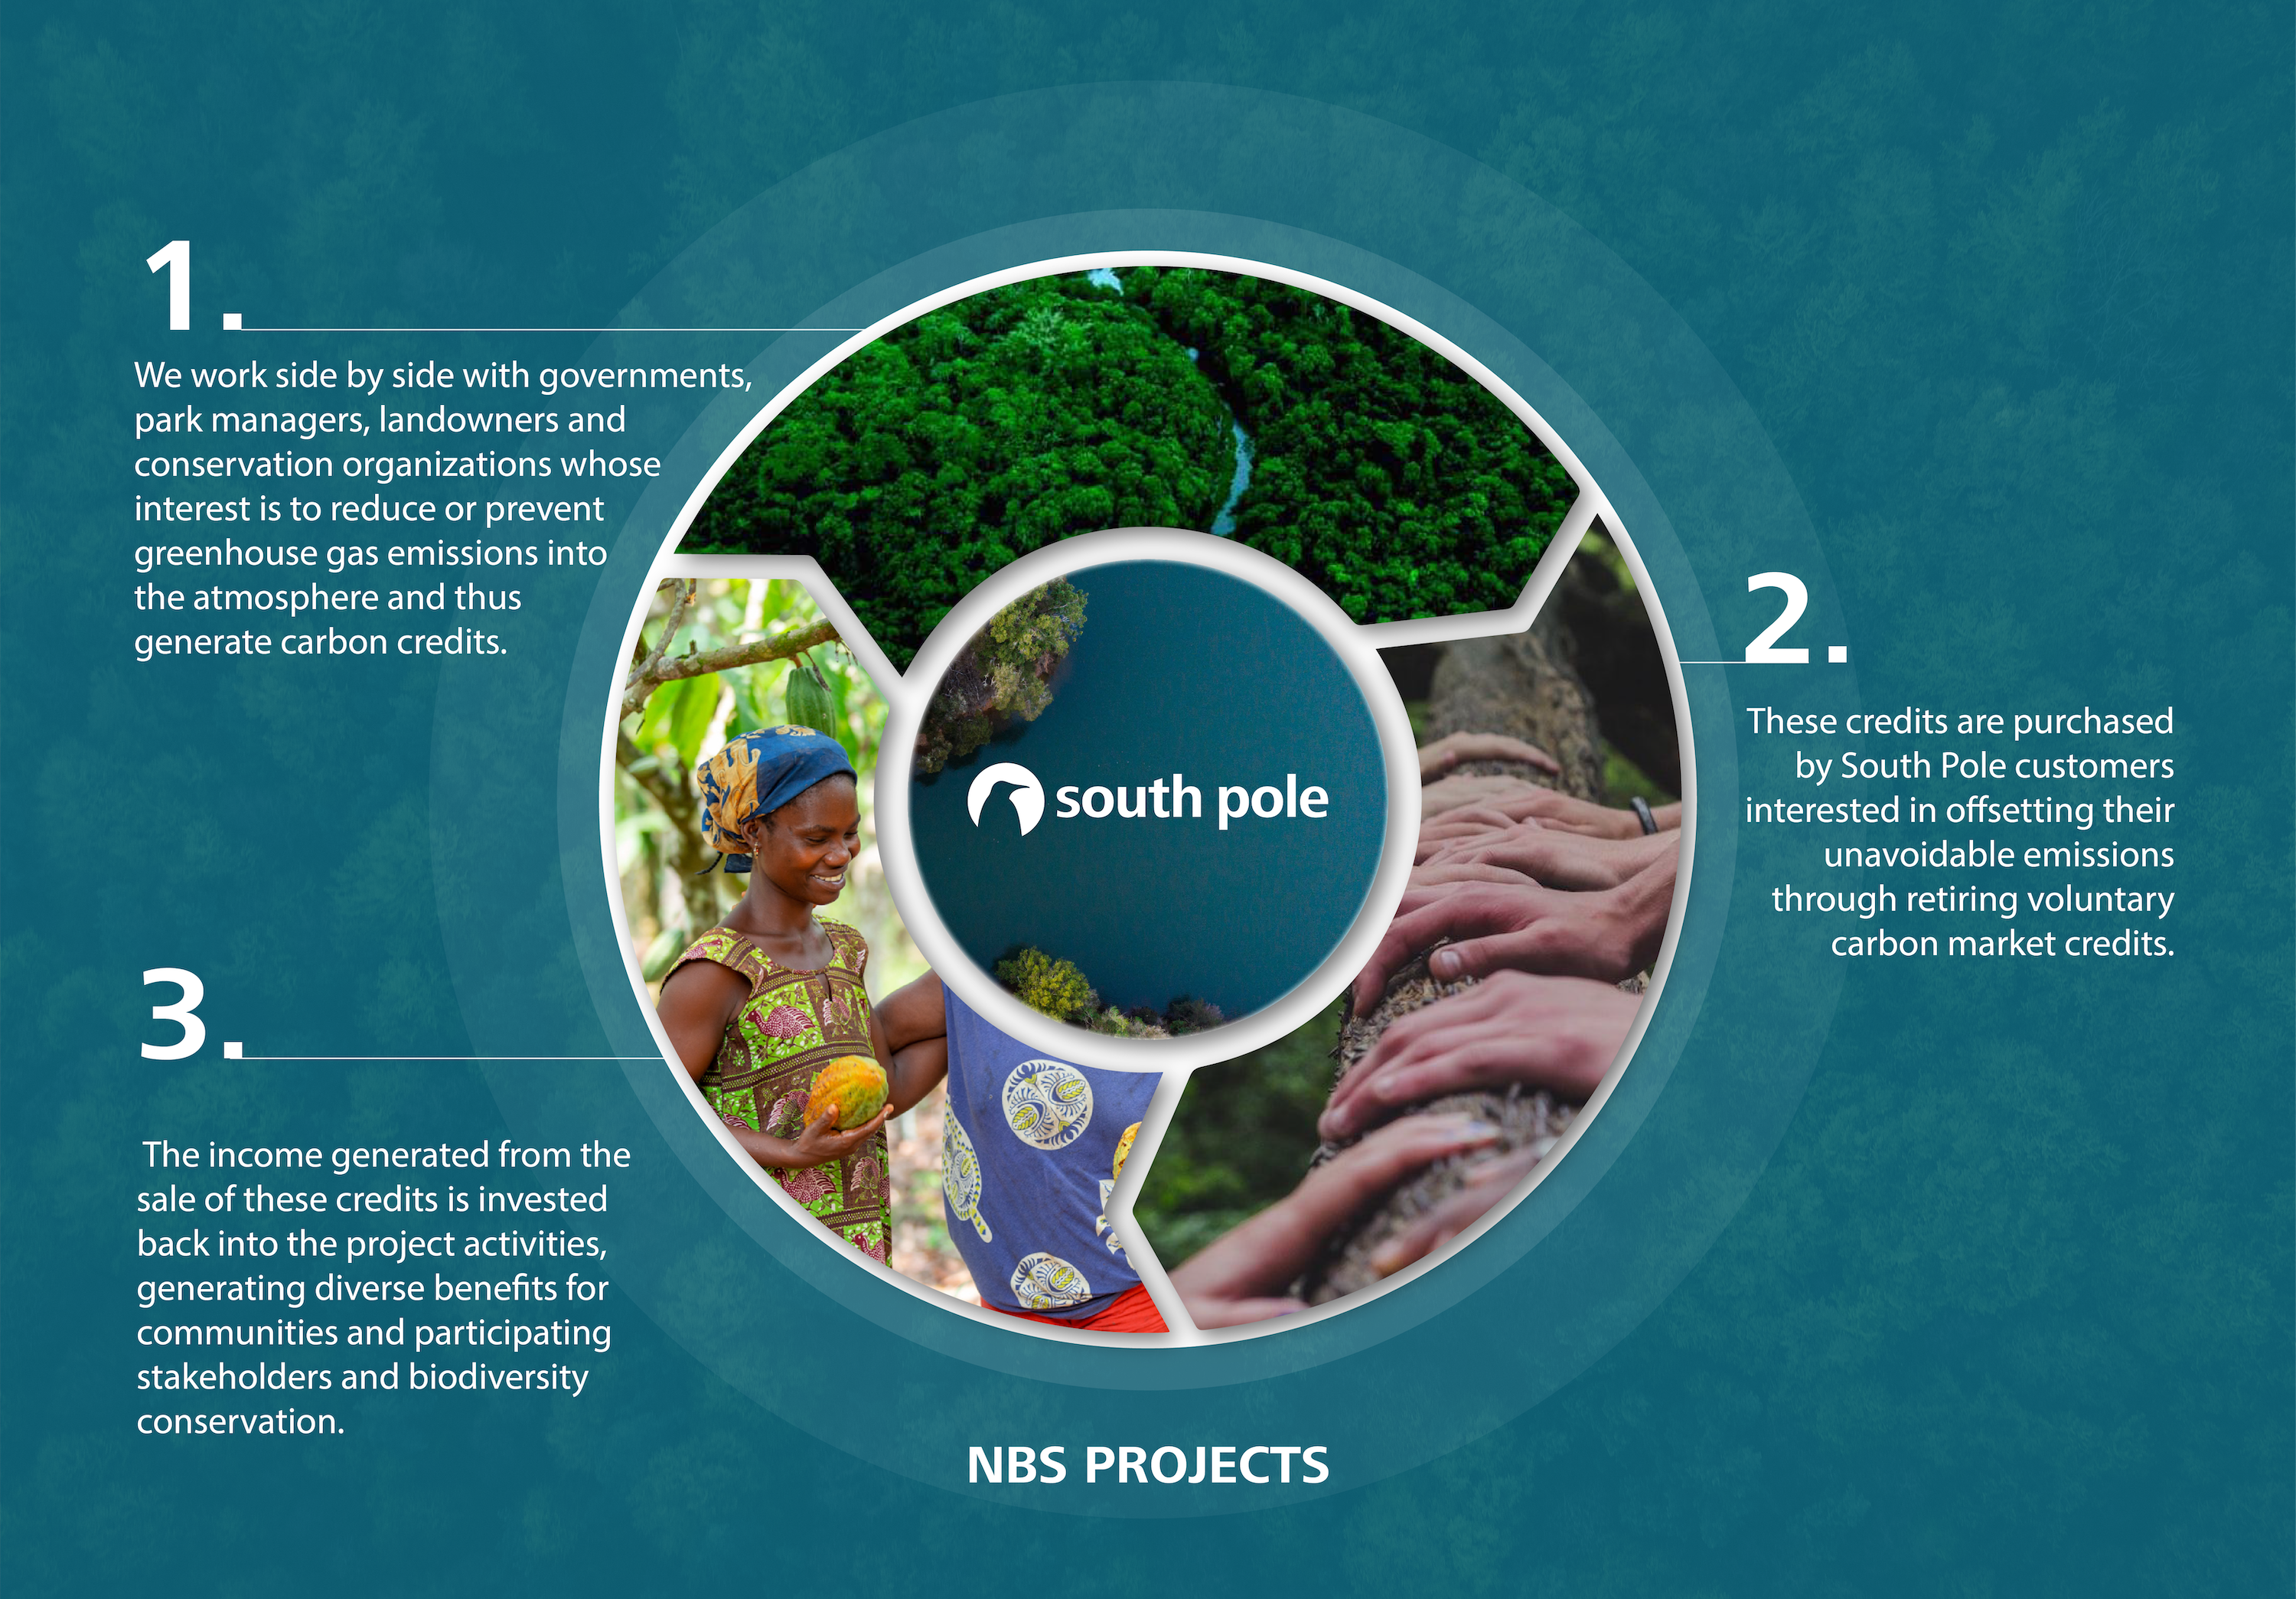 Image: Developing a Nature Based climate project with South Pole.